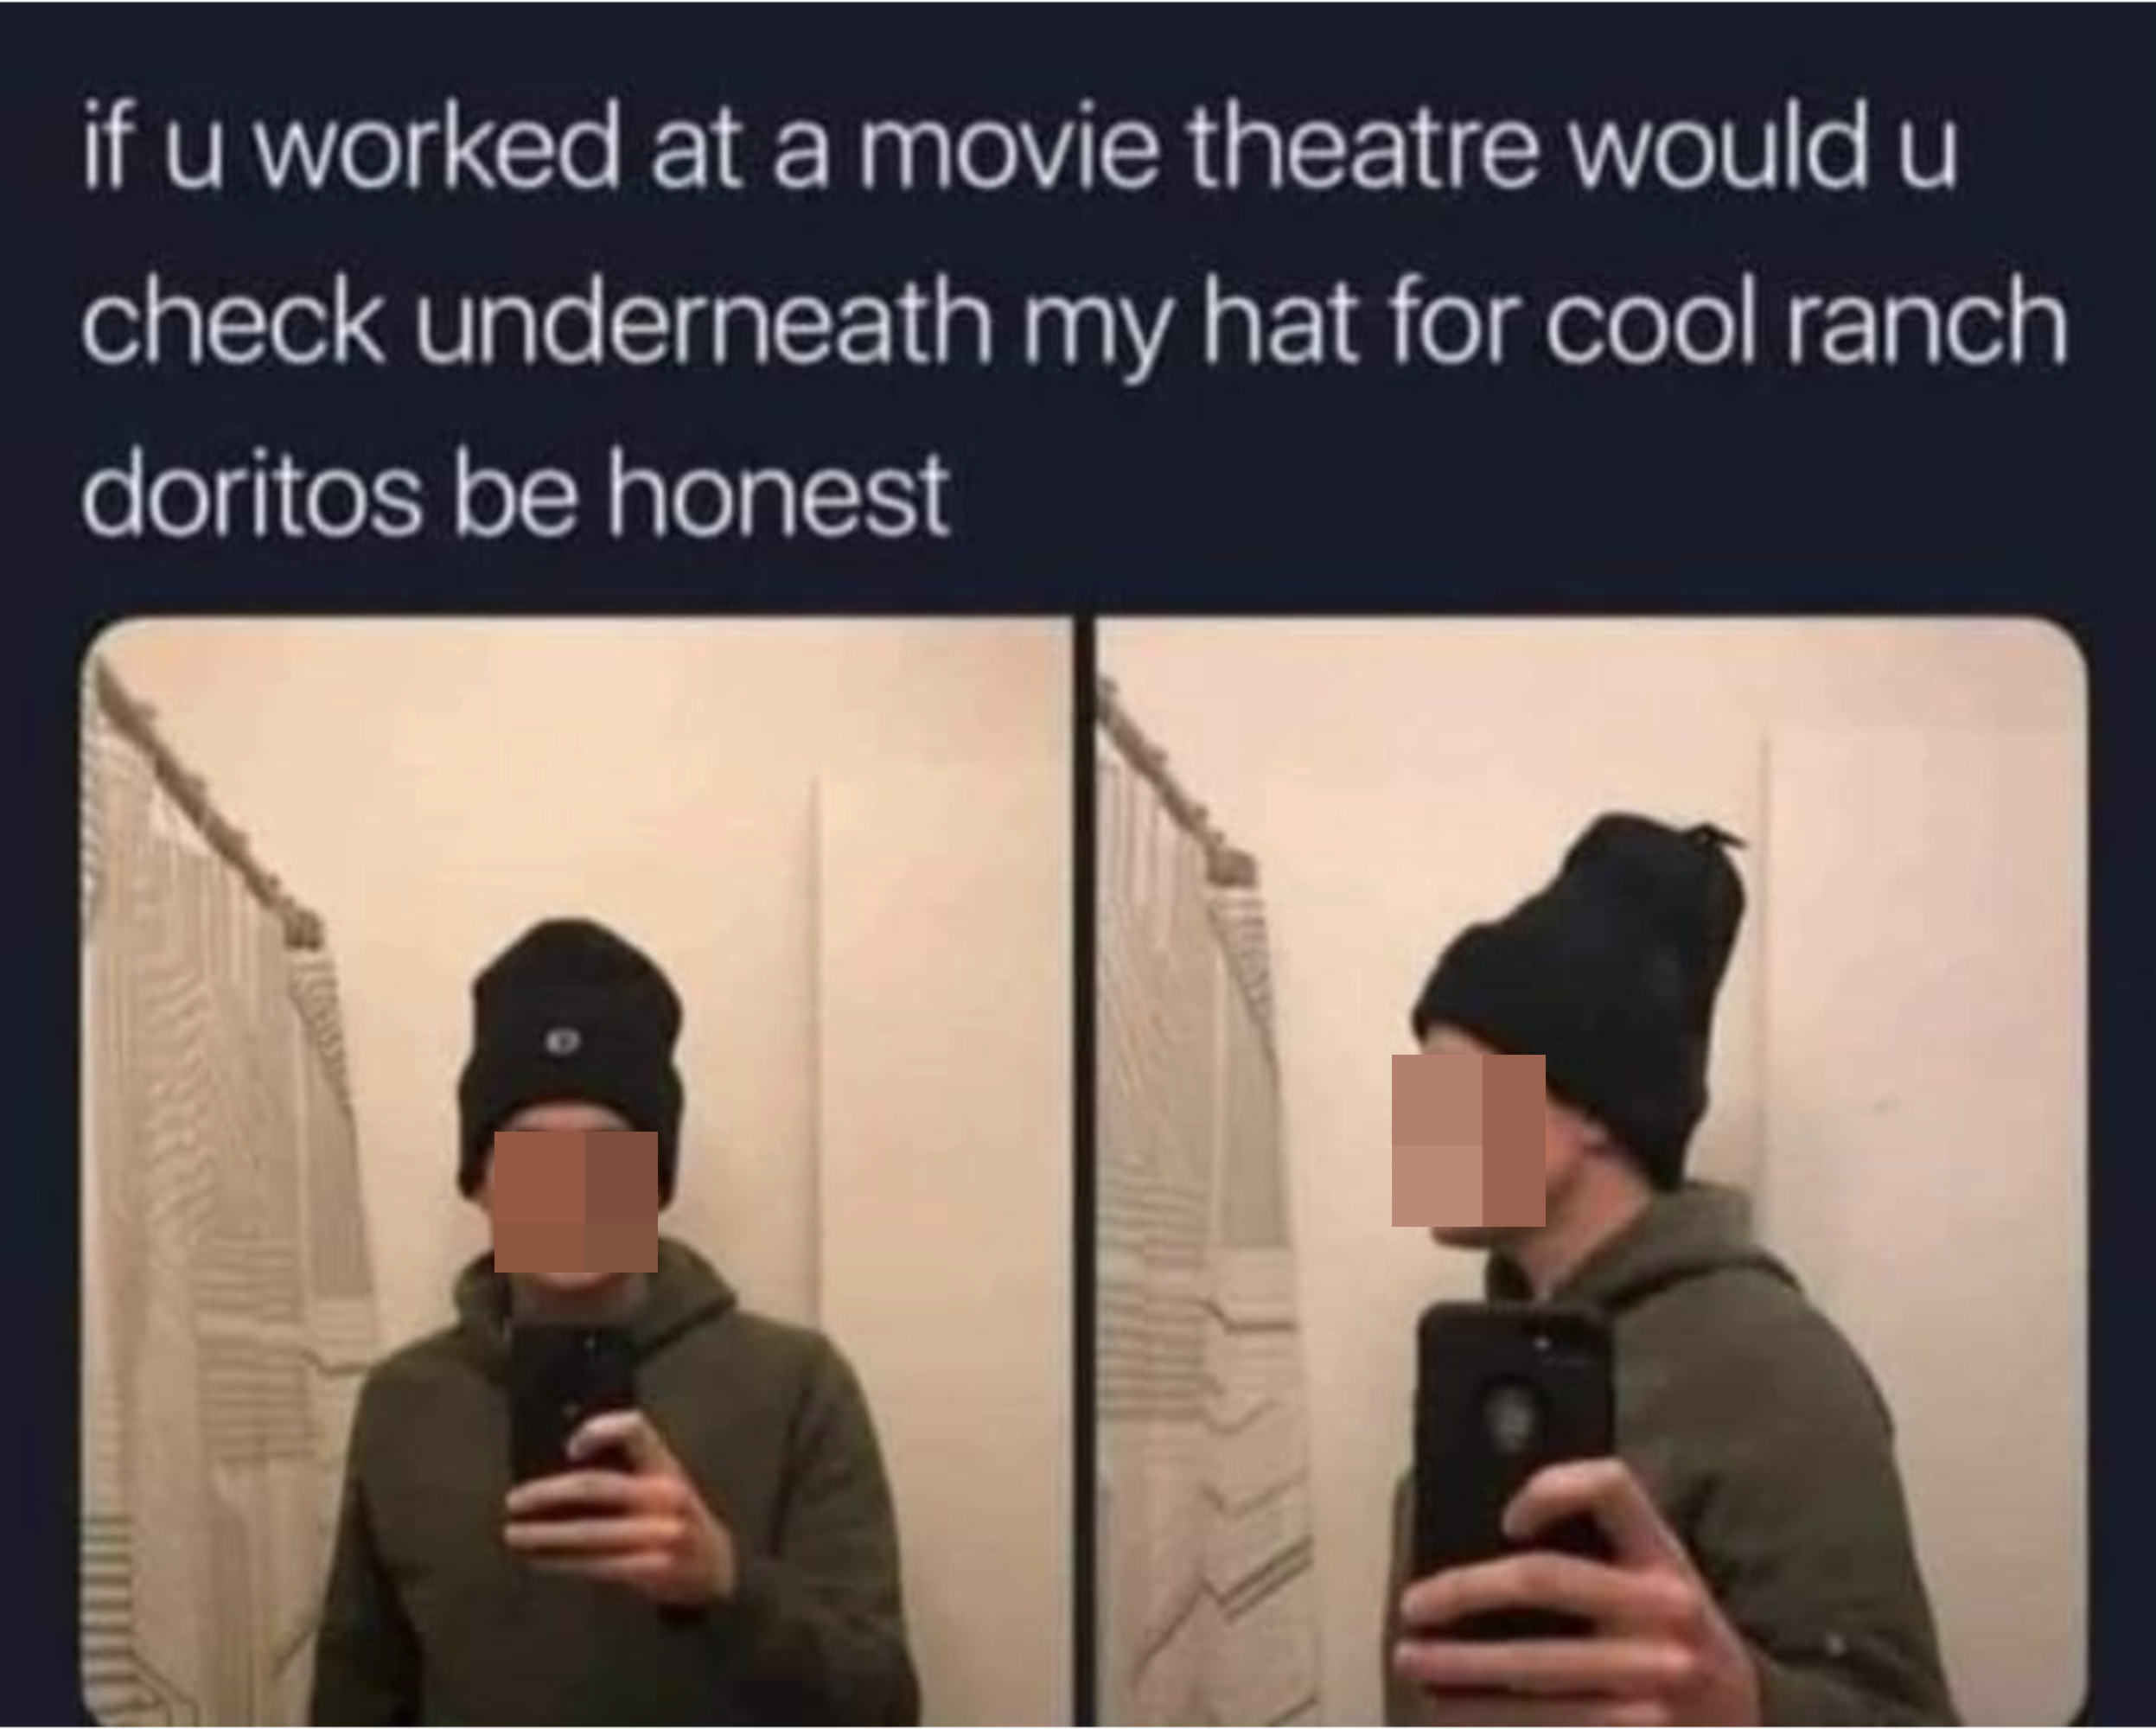 &quot;if u worked at a movie theatre would you check underneath my hat for cool ranch doritos be honest&quot;